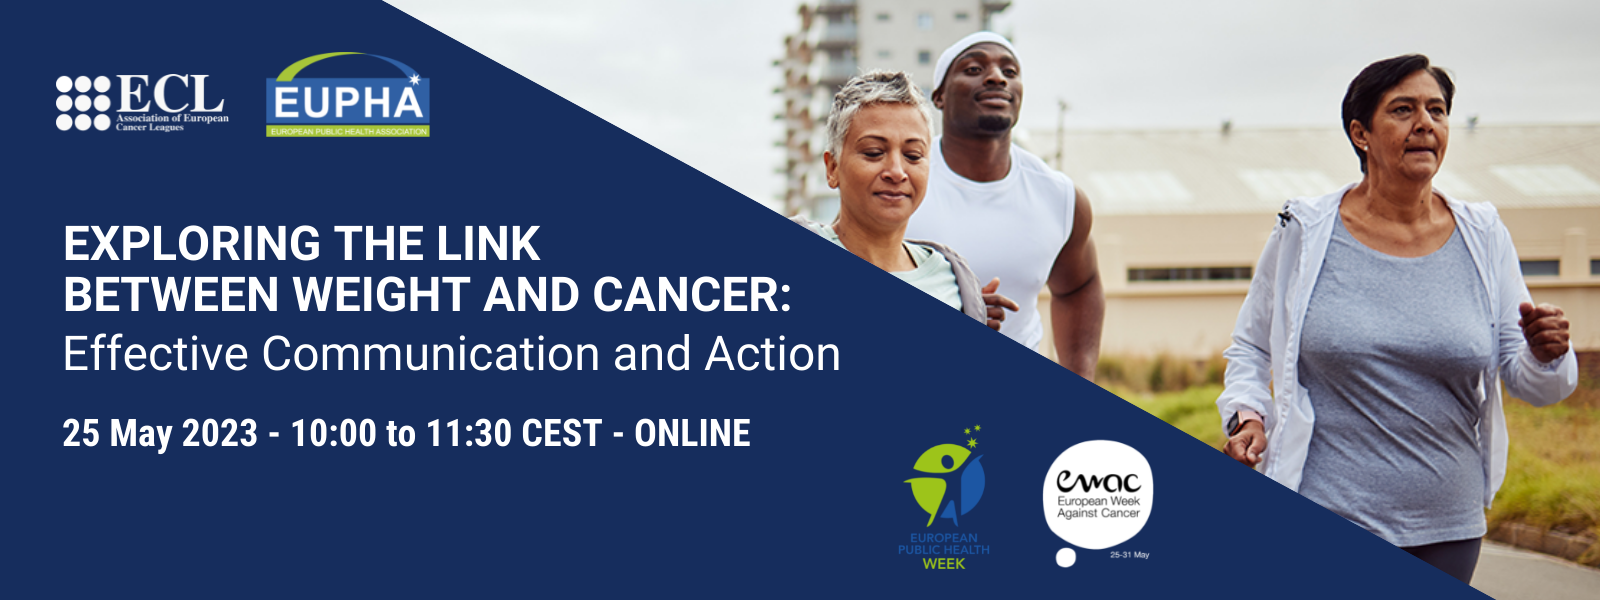 Webinar: Exploring the Link Between Weight and Cancer – Effective